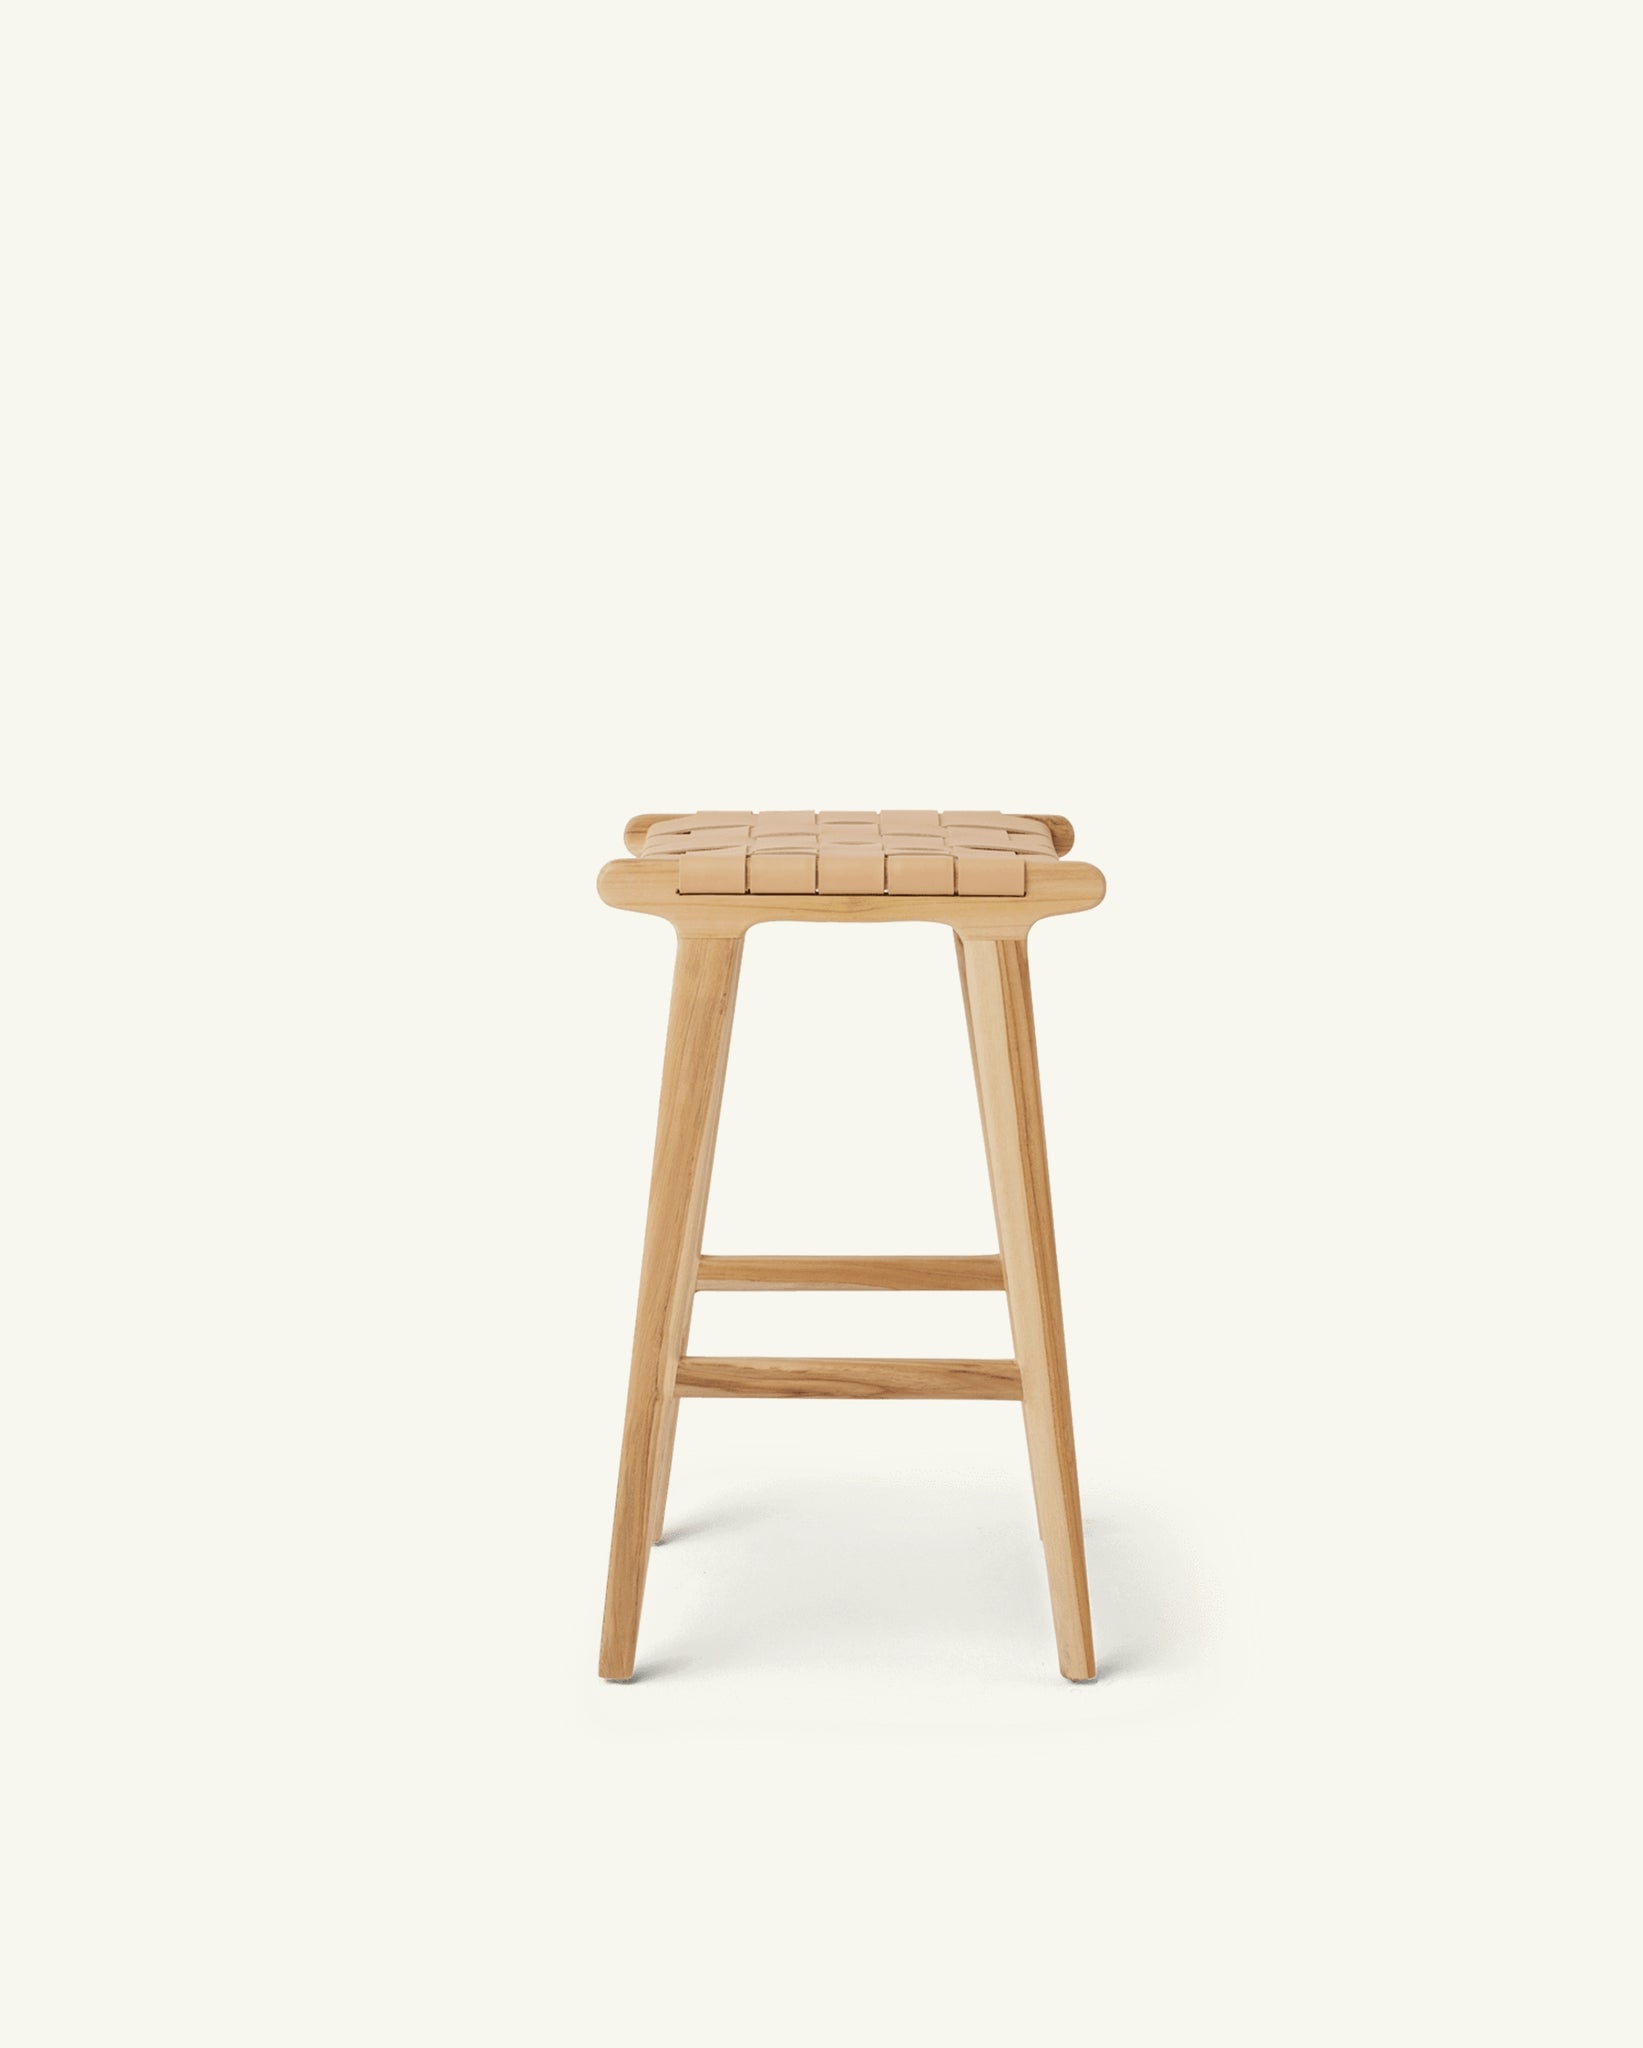 stool #3 in natural